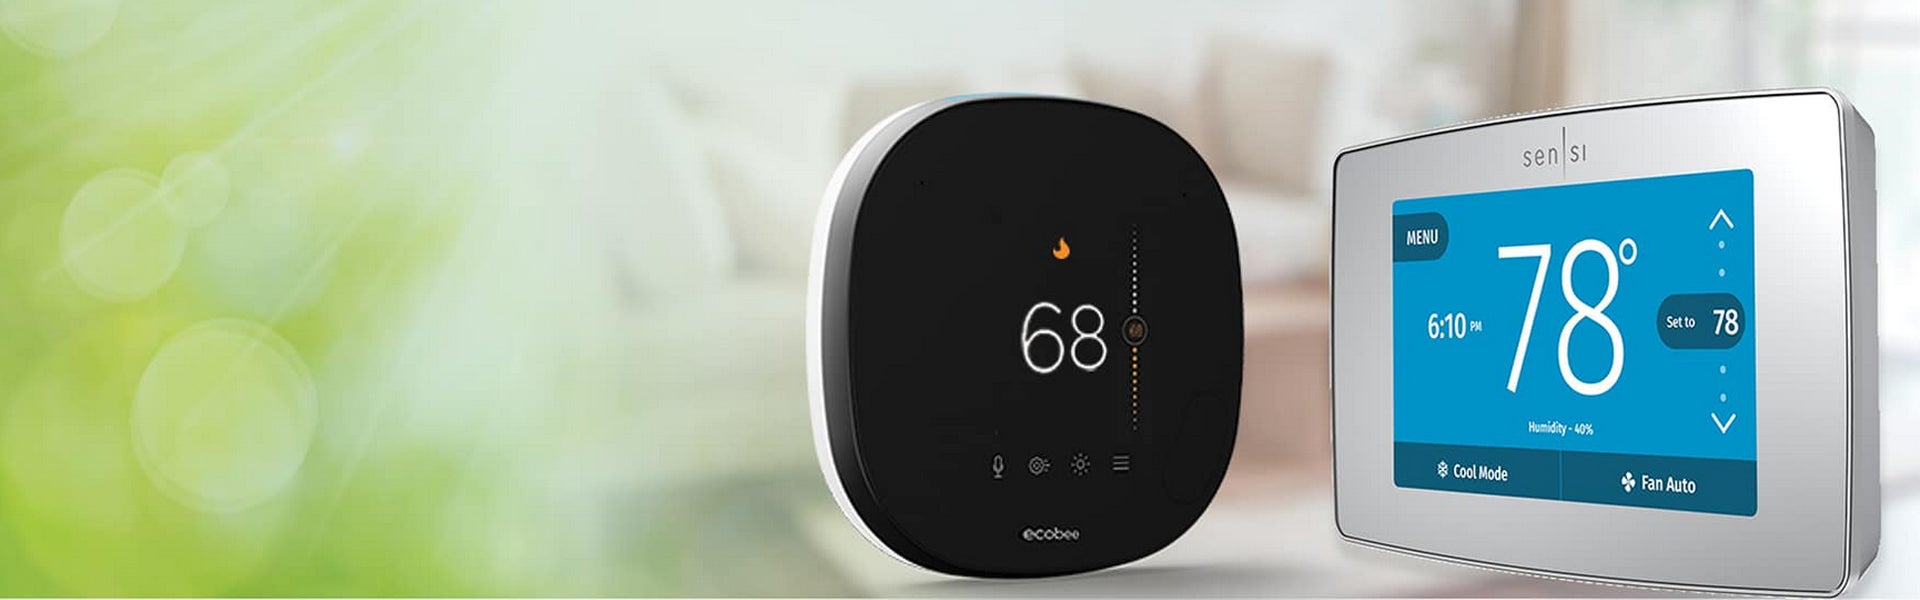 image of ecobee and emerson smart thermostats